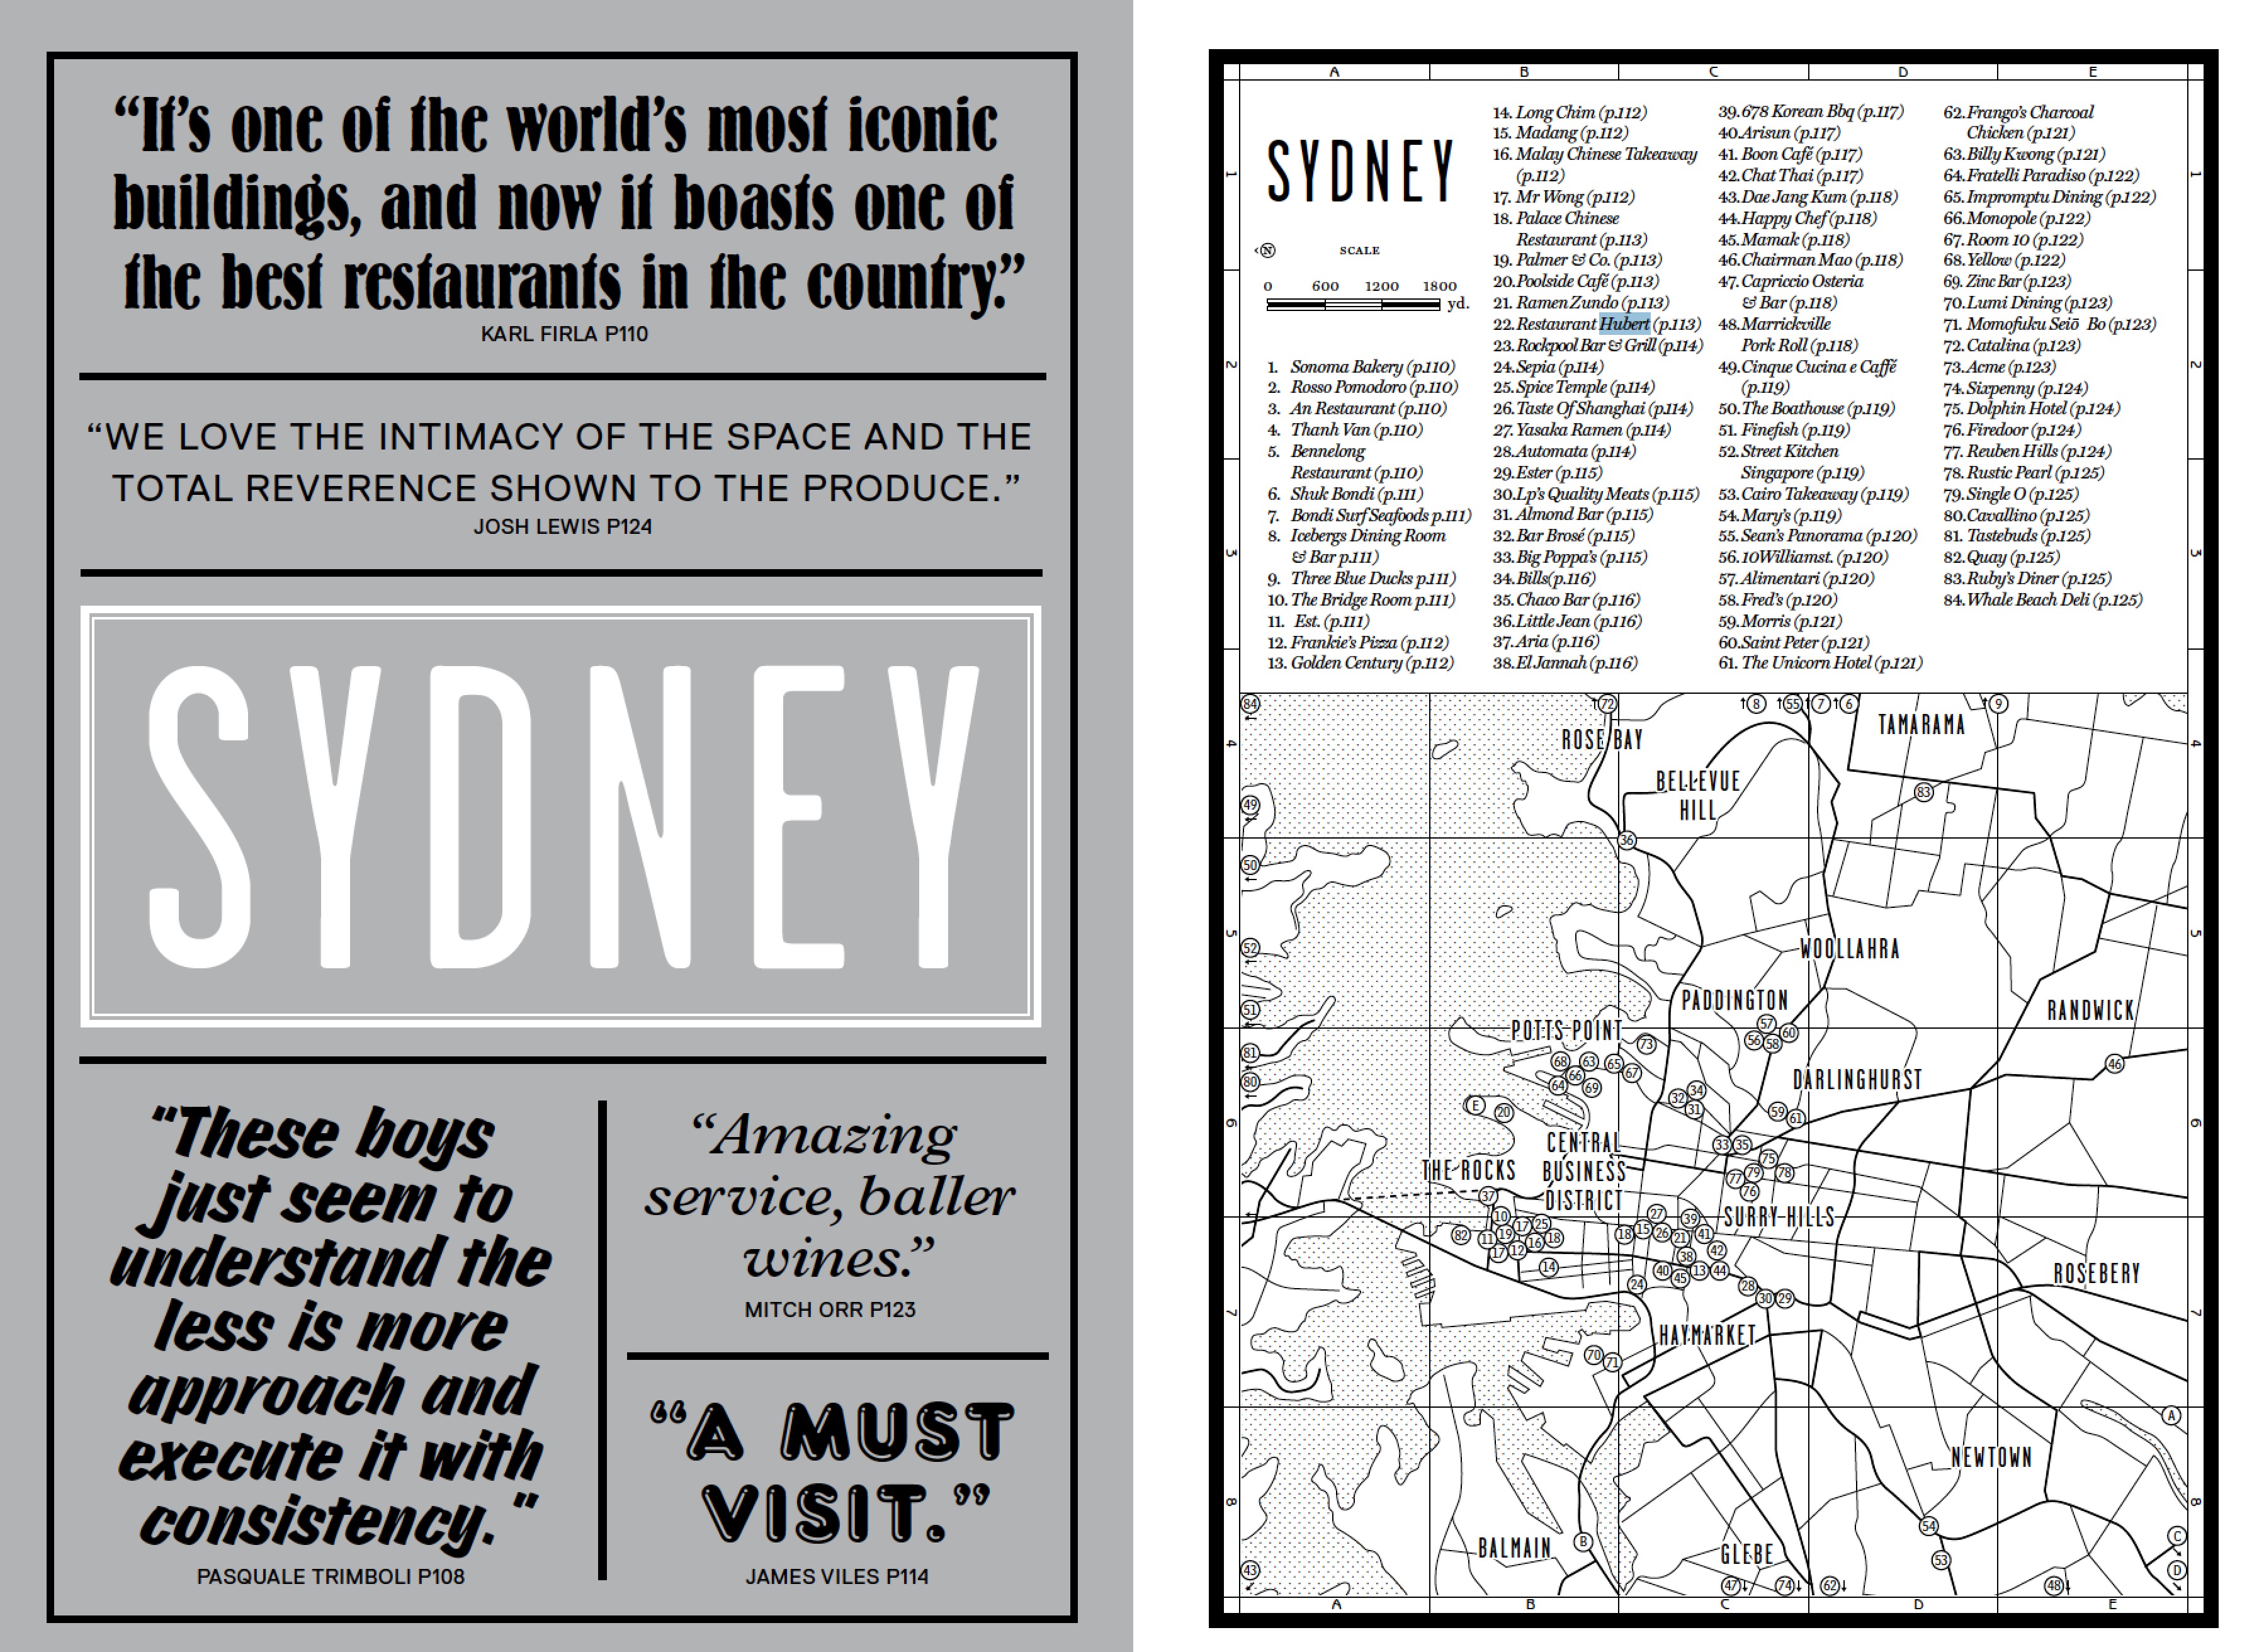 The Sydney introduction from our new book Where Chefs Eat